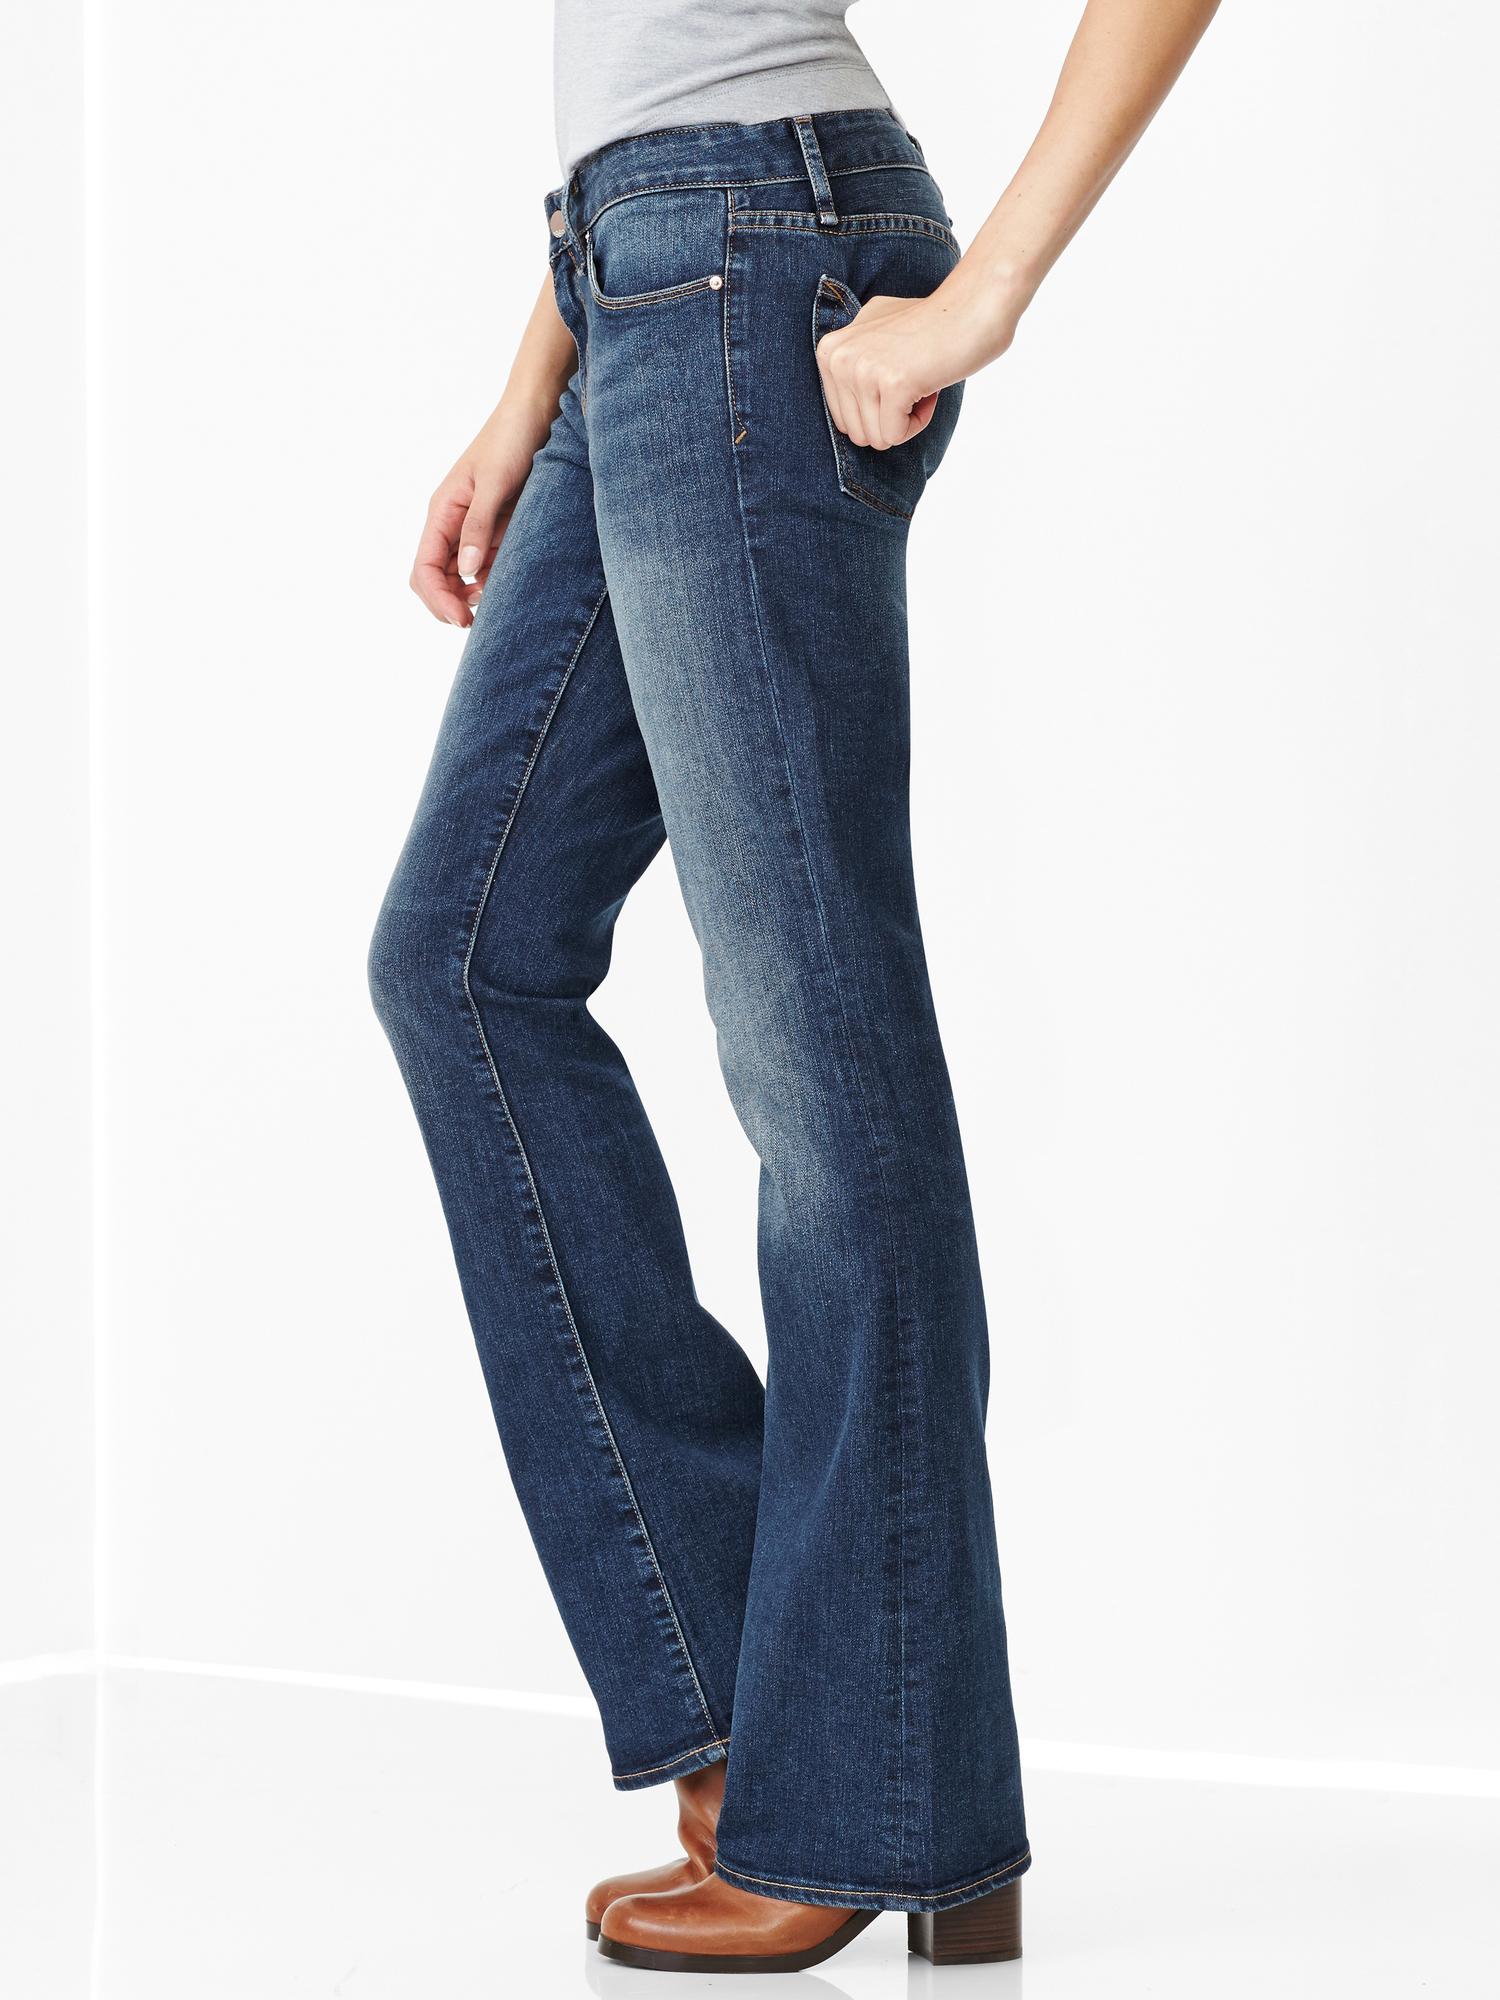 AUTHENTIC 1969 perfect boot jeans